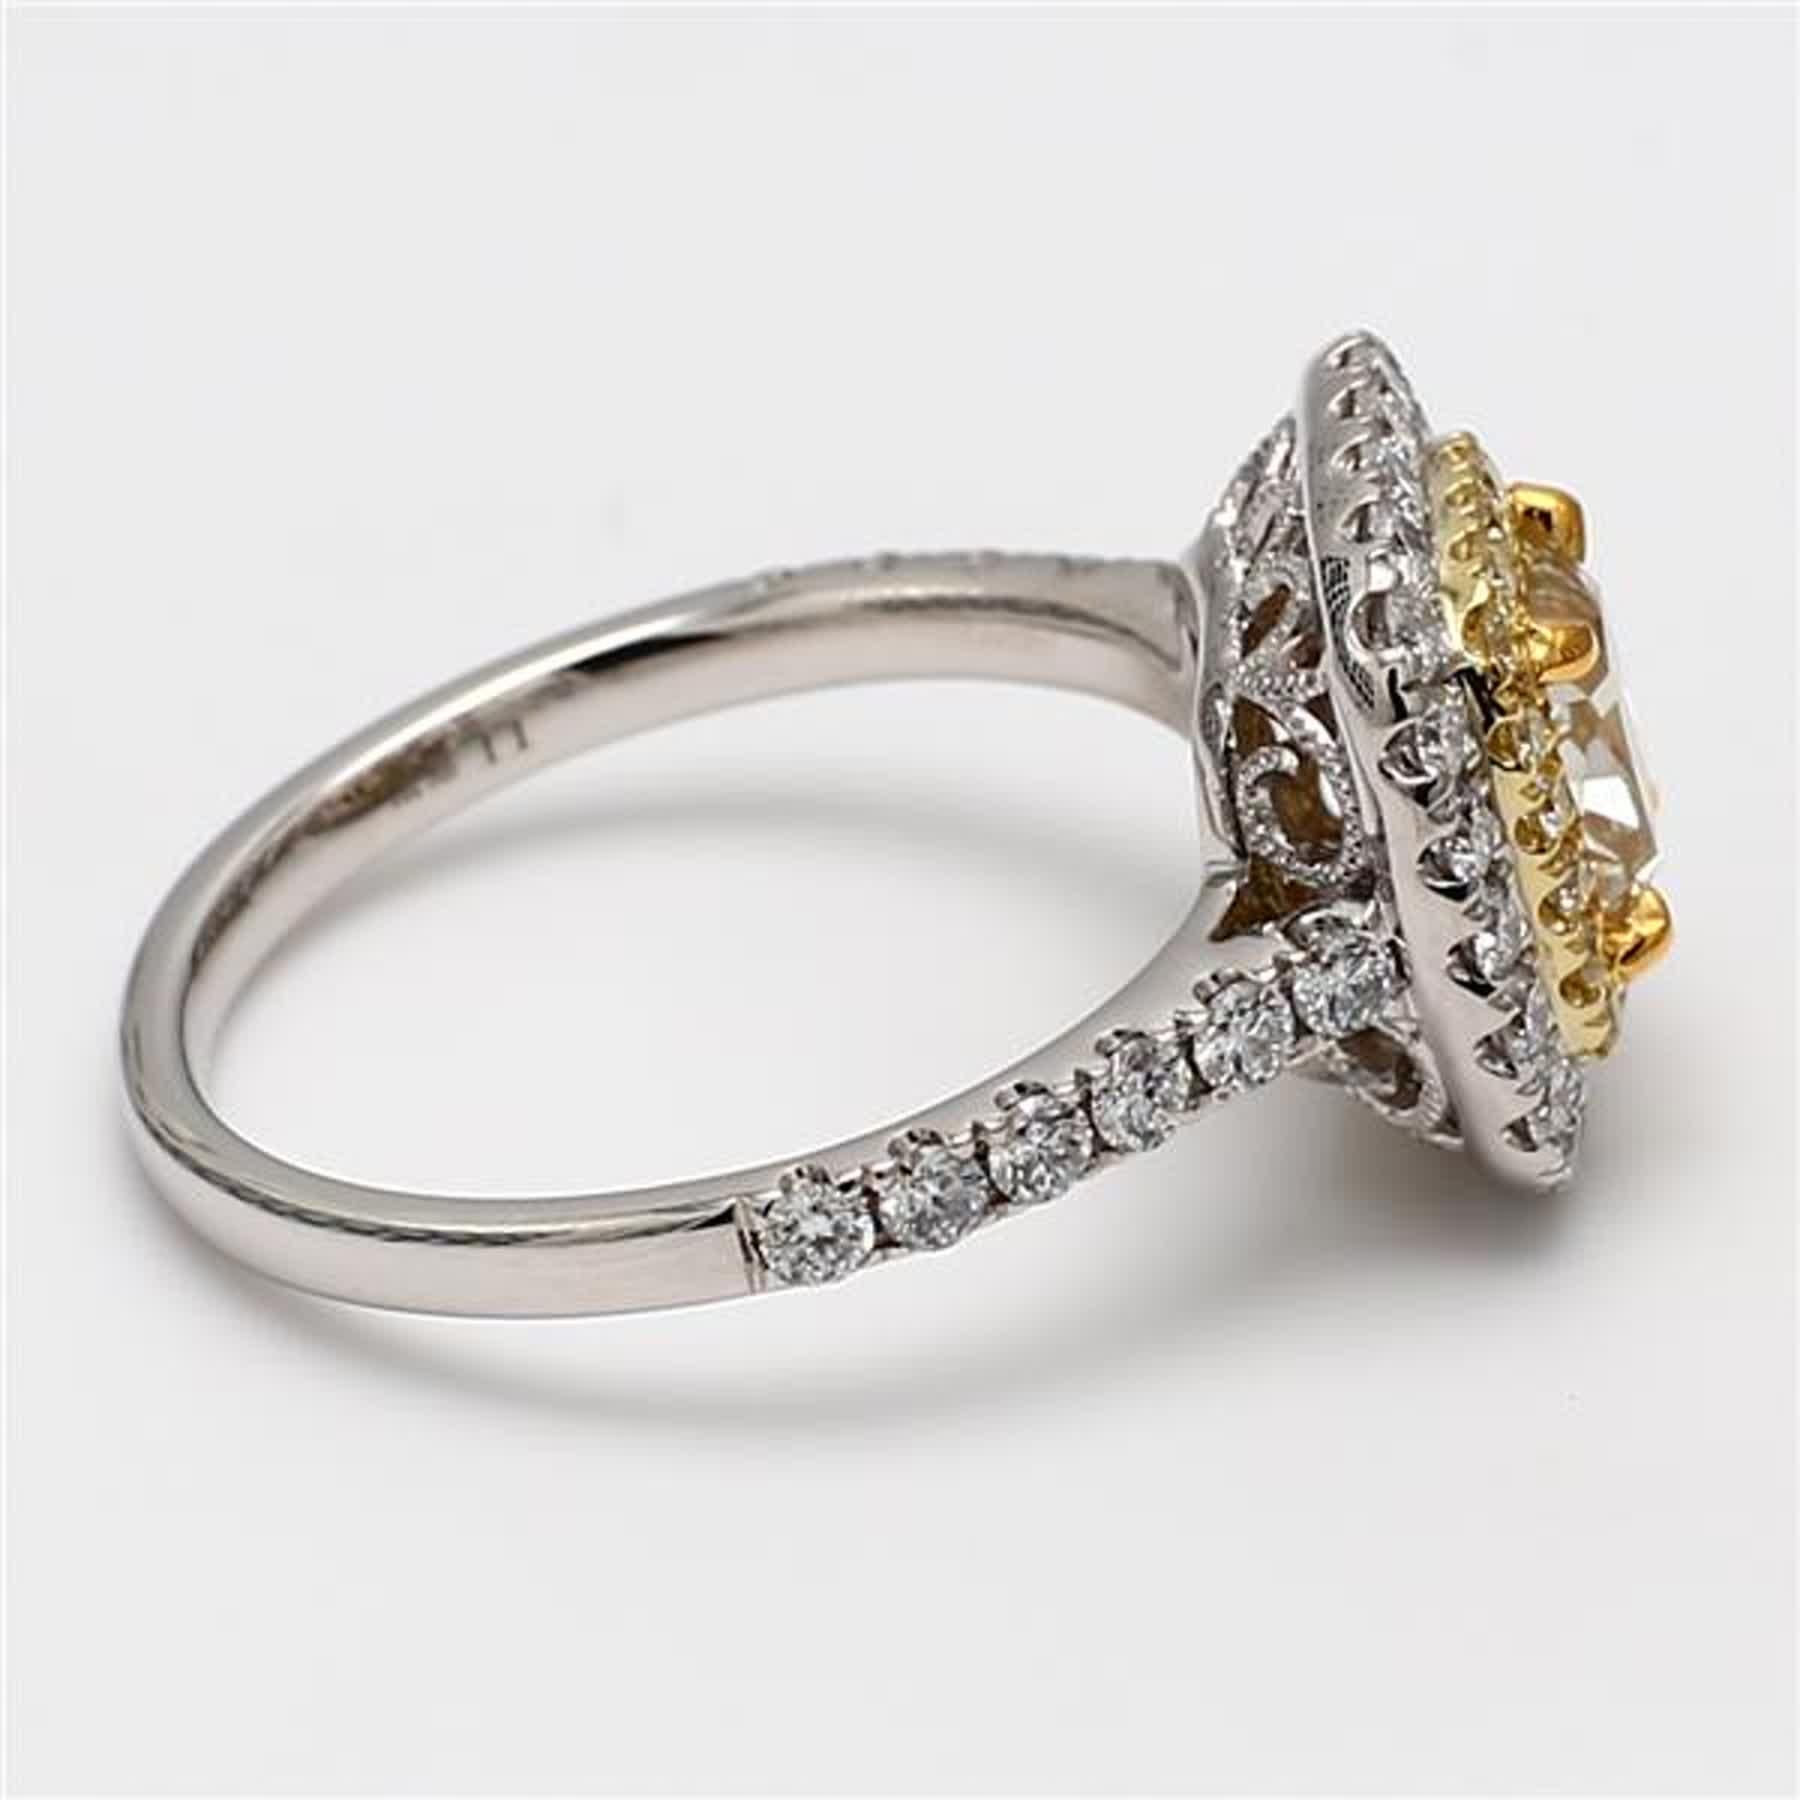 Cushion Cut GIA Certified Natural Yellow Cushion and White Diamond 1.95 Carat TW Gold Ring For Sale